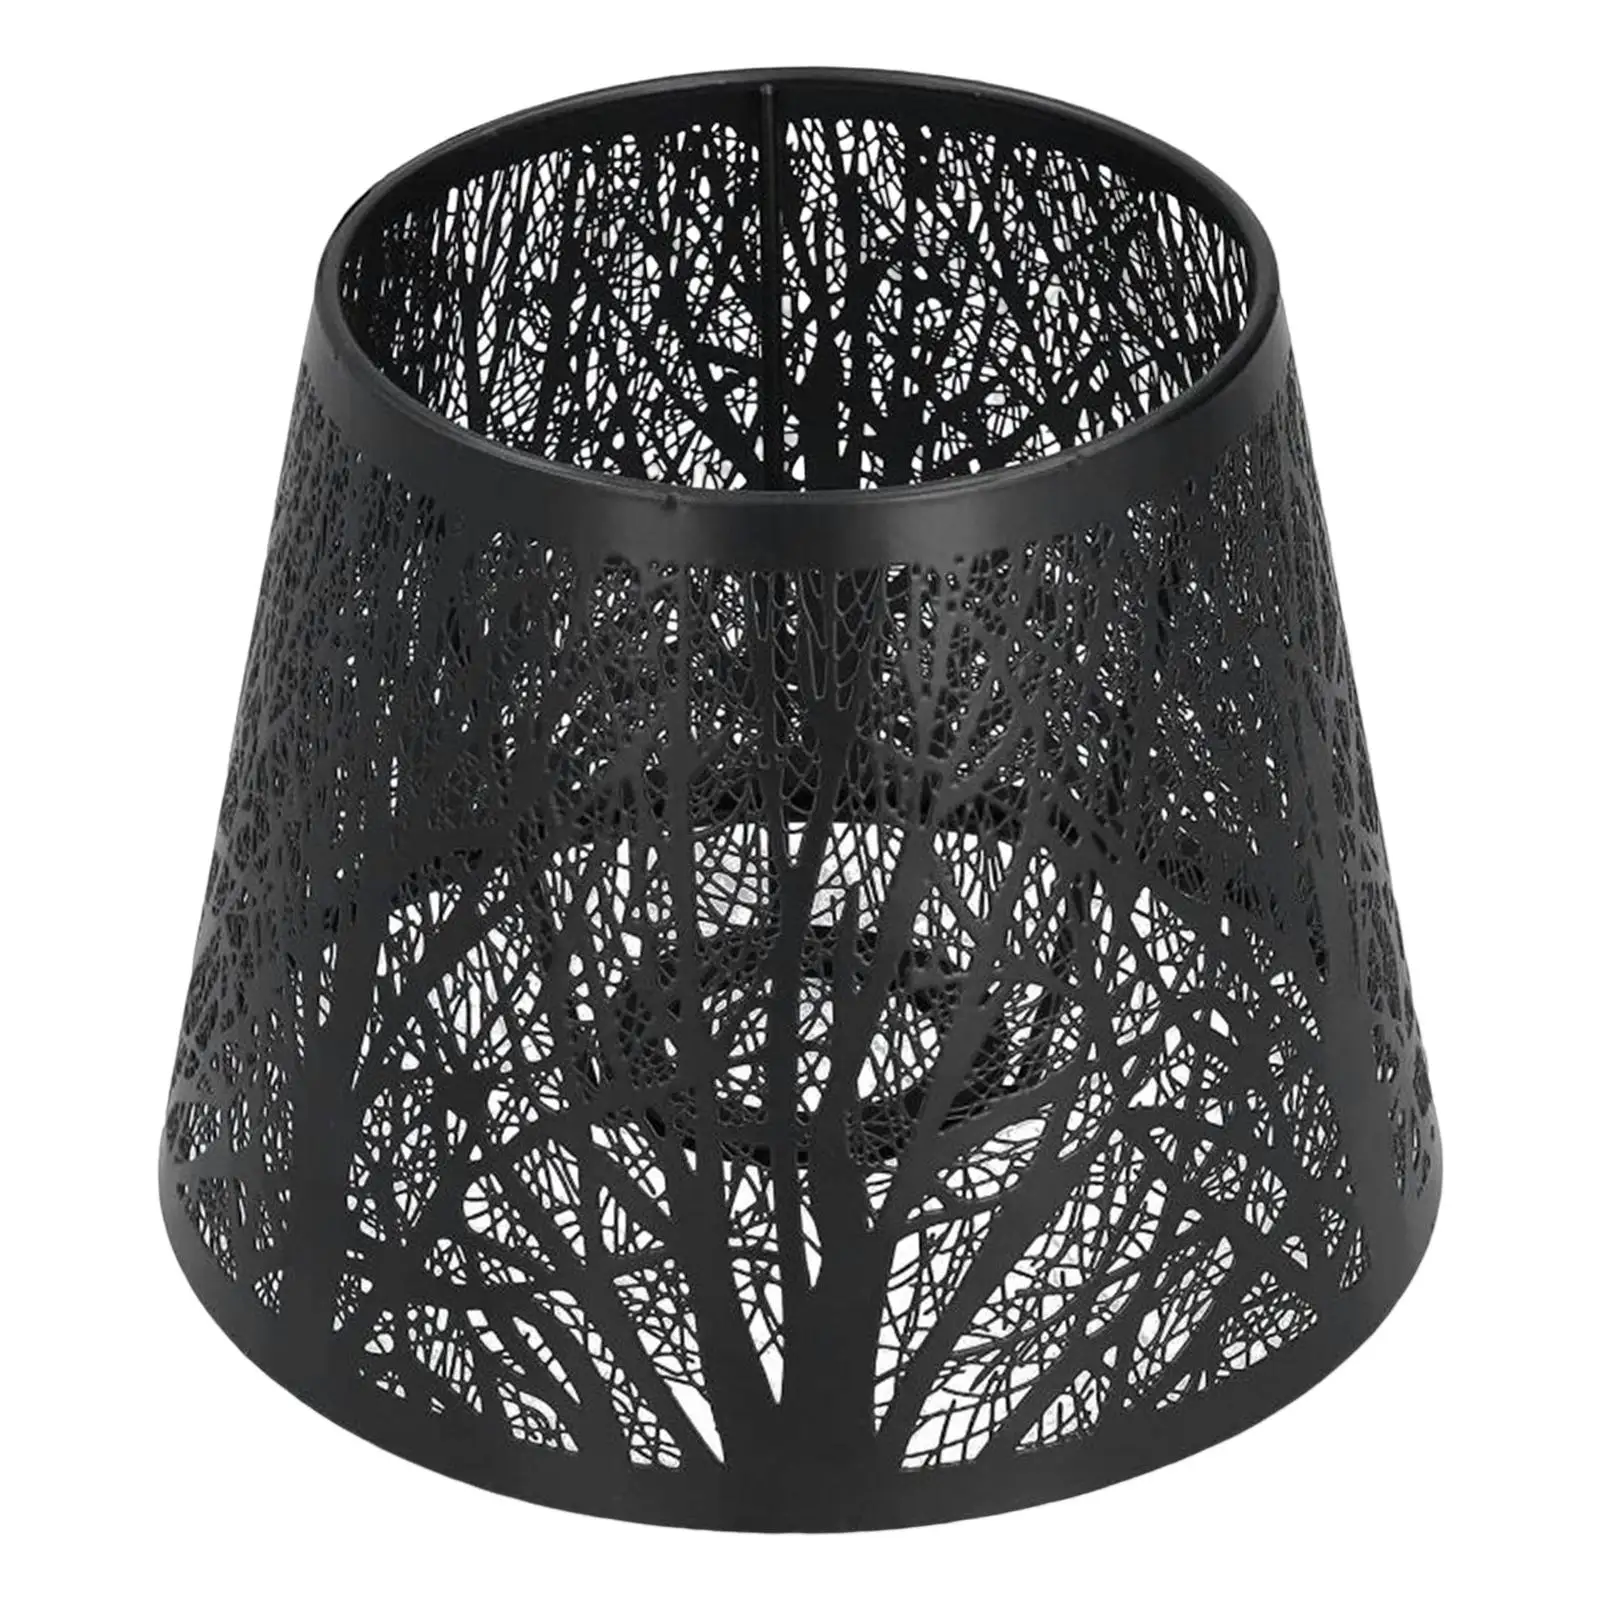 Modern Minimalist Lamp Shade Tree Shadow Metal Cage Light Cover Decorative for Table Lamp Teahouse Office NightStand Bedside